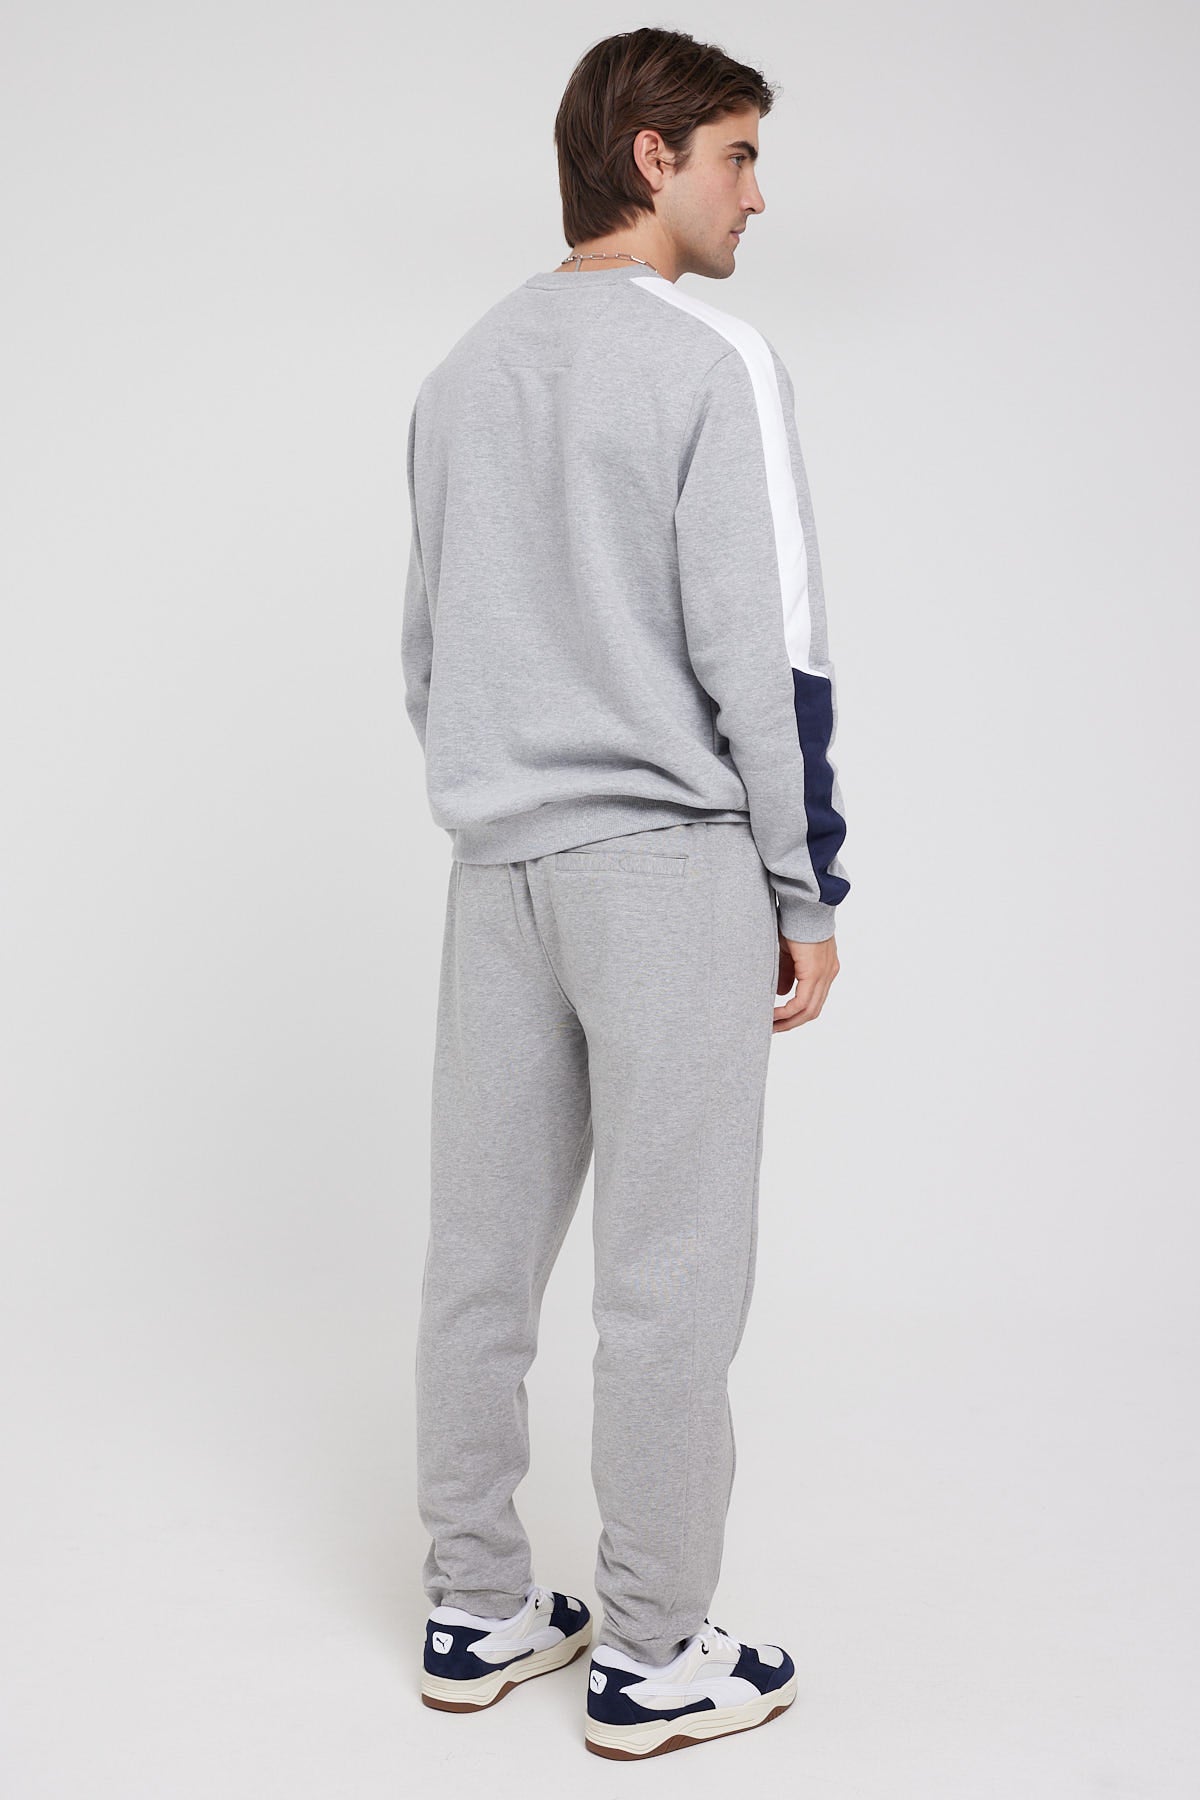 Tommy Jeans TJM RLX TJ Grey – Sweatpant Luxe Silver Htr Store Universal